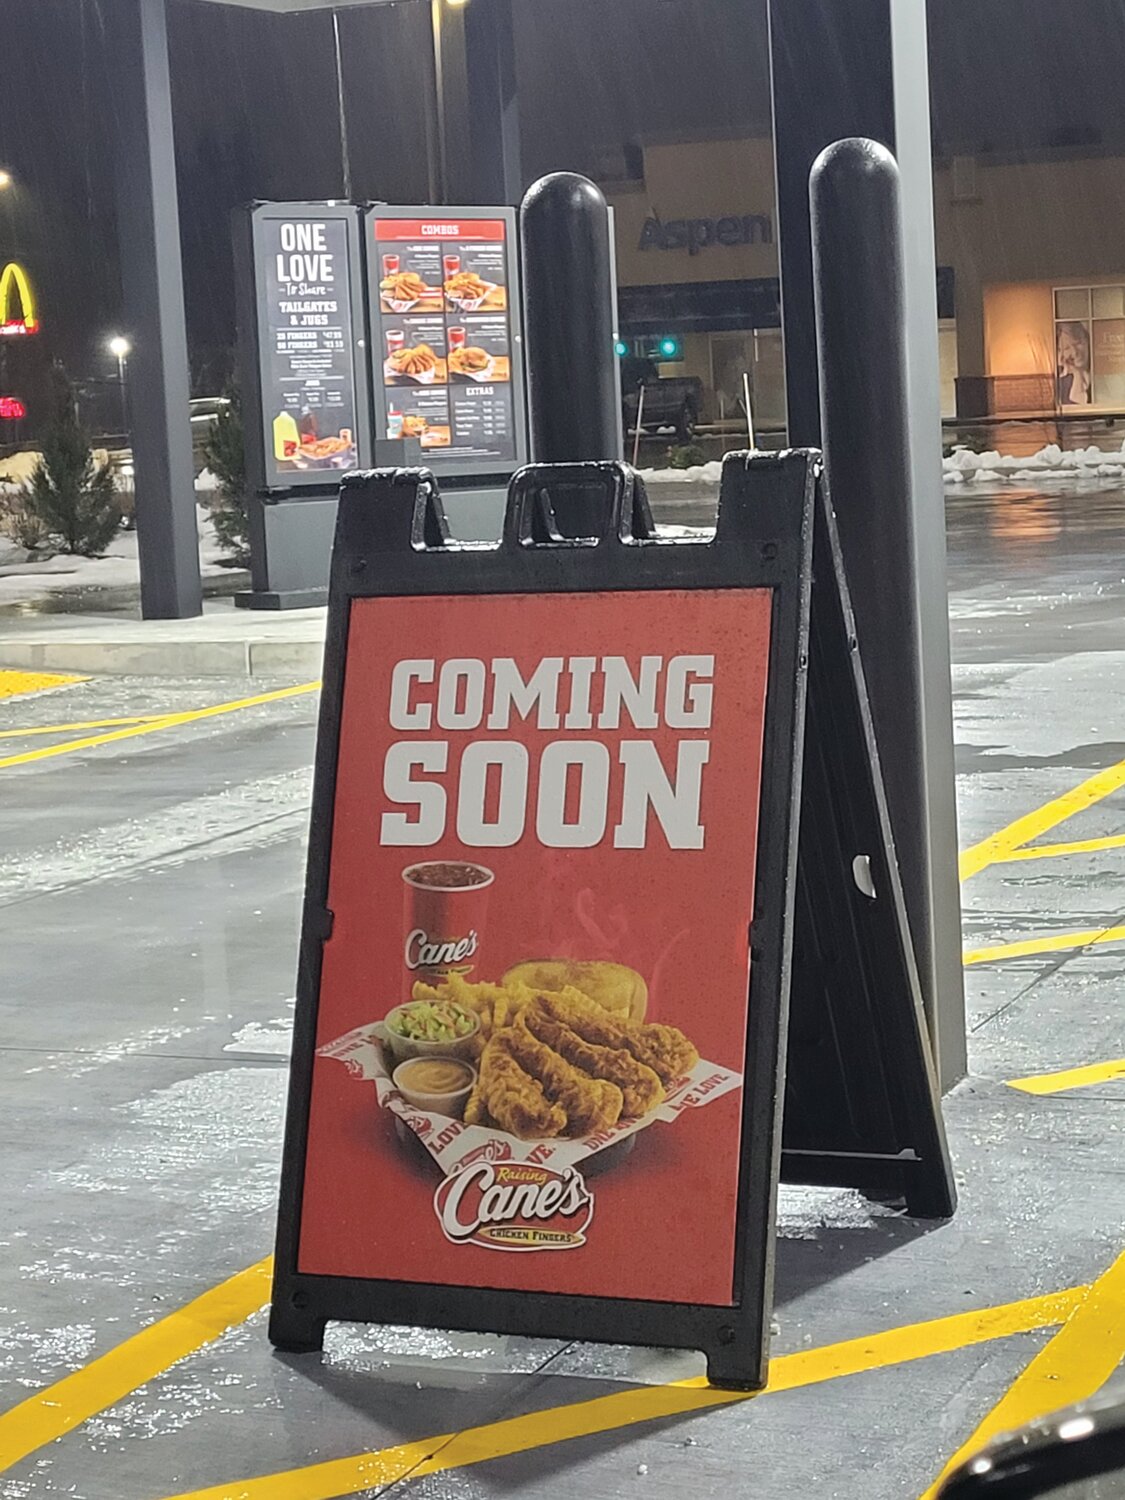 WHO YOU CALLING ‘CHICKEN’? Raising Cane’s plans to open to customers next week. On Jan. 17, Raising Cane’s Chicken Fingers will open at 1386 Atwood Ave.